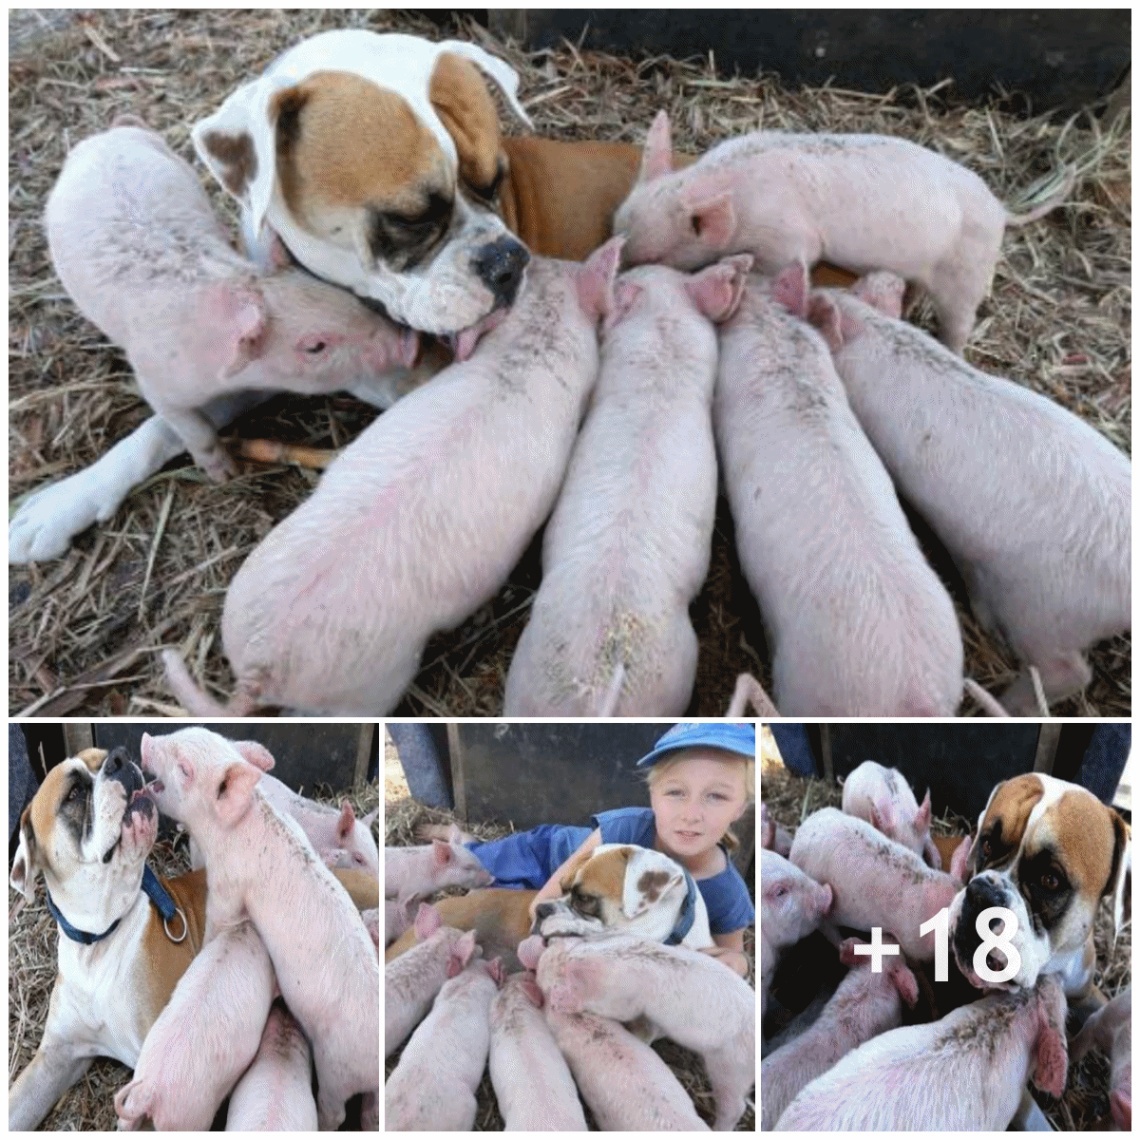 The entire town was taken aback when the benevolent mother dog looked after the piglets after her mother passed away.